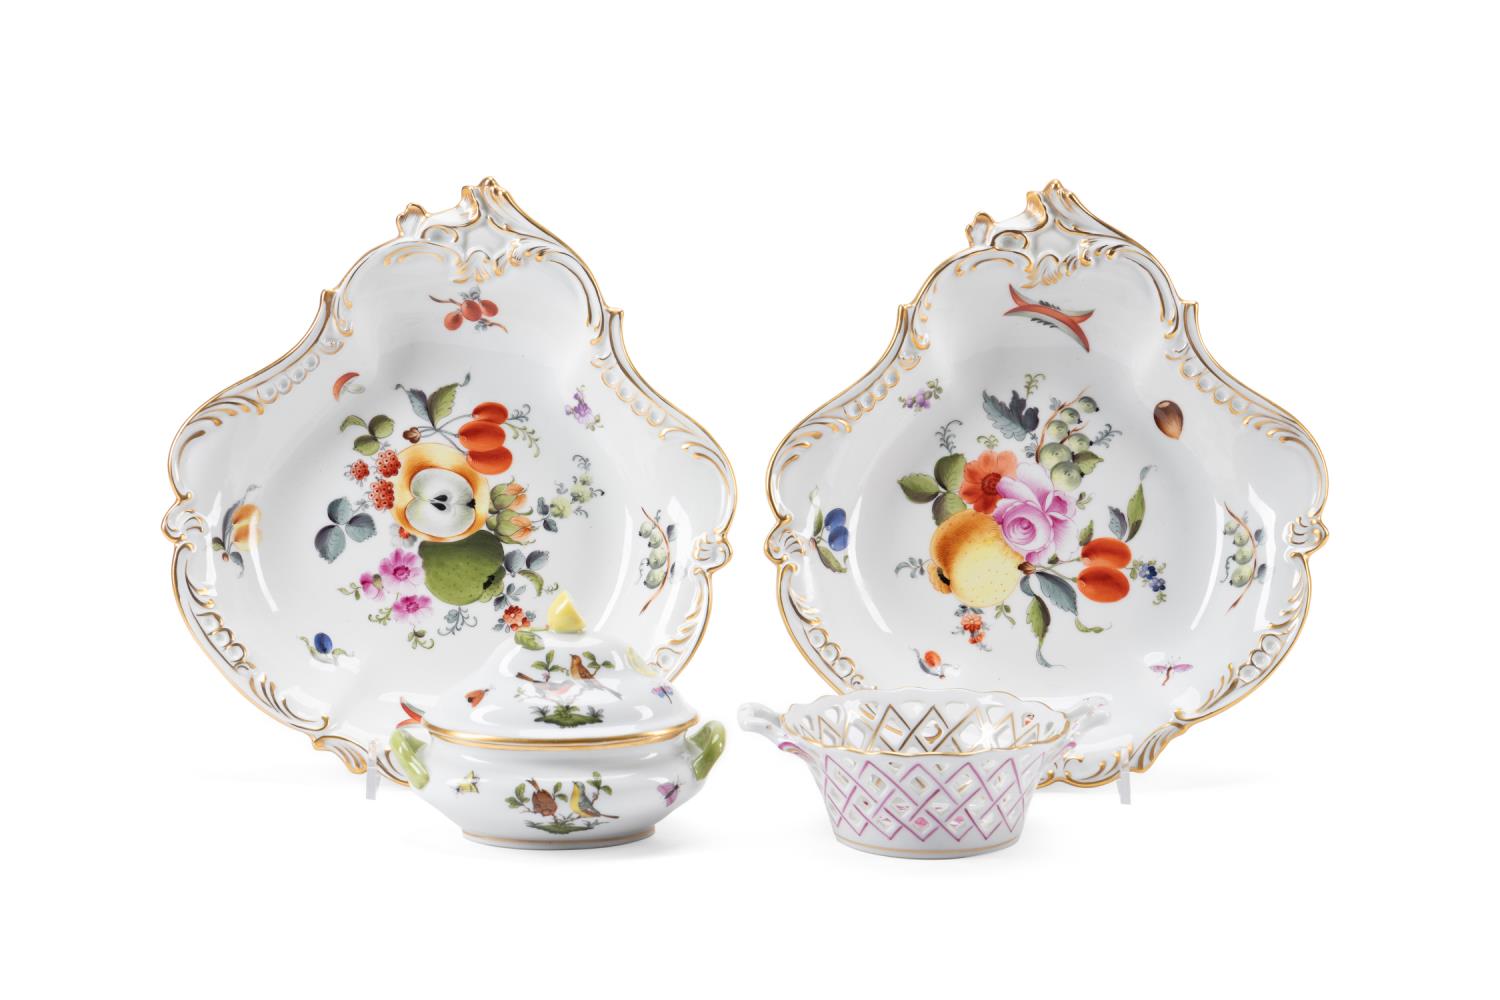 SELECTION OF HEREND PORCELAIN TABLEWARE  359144